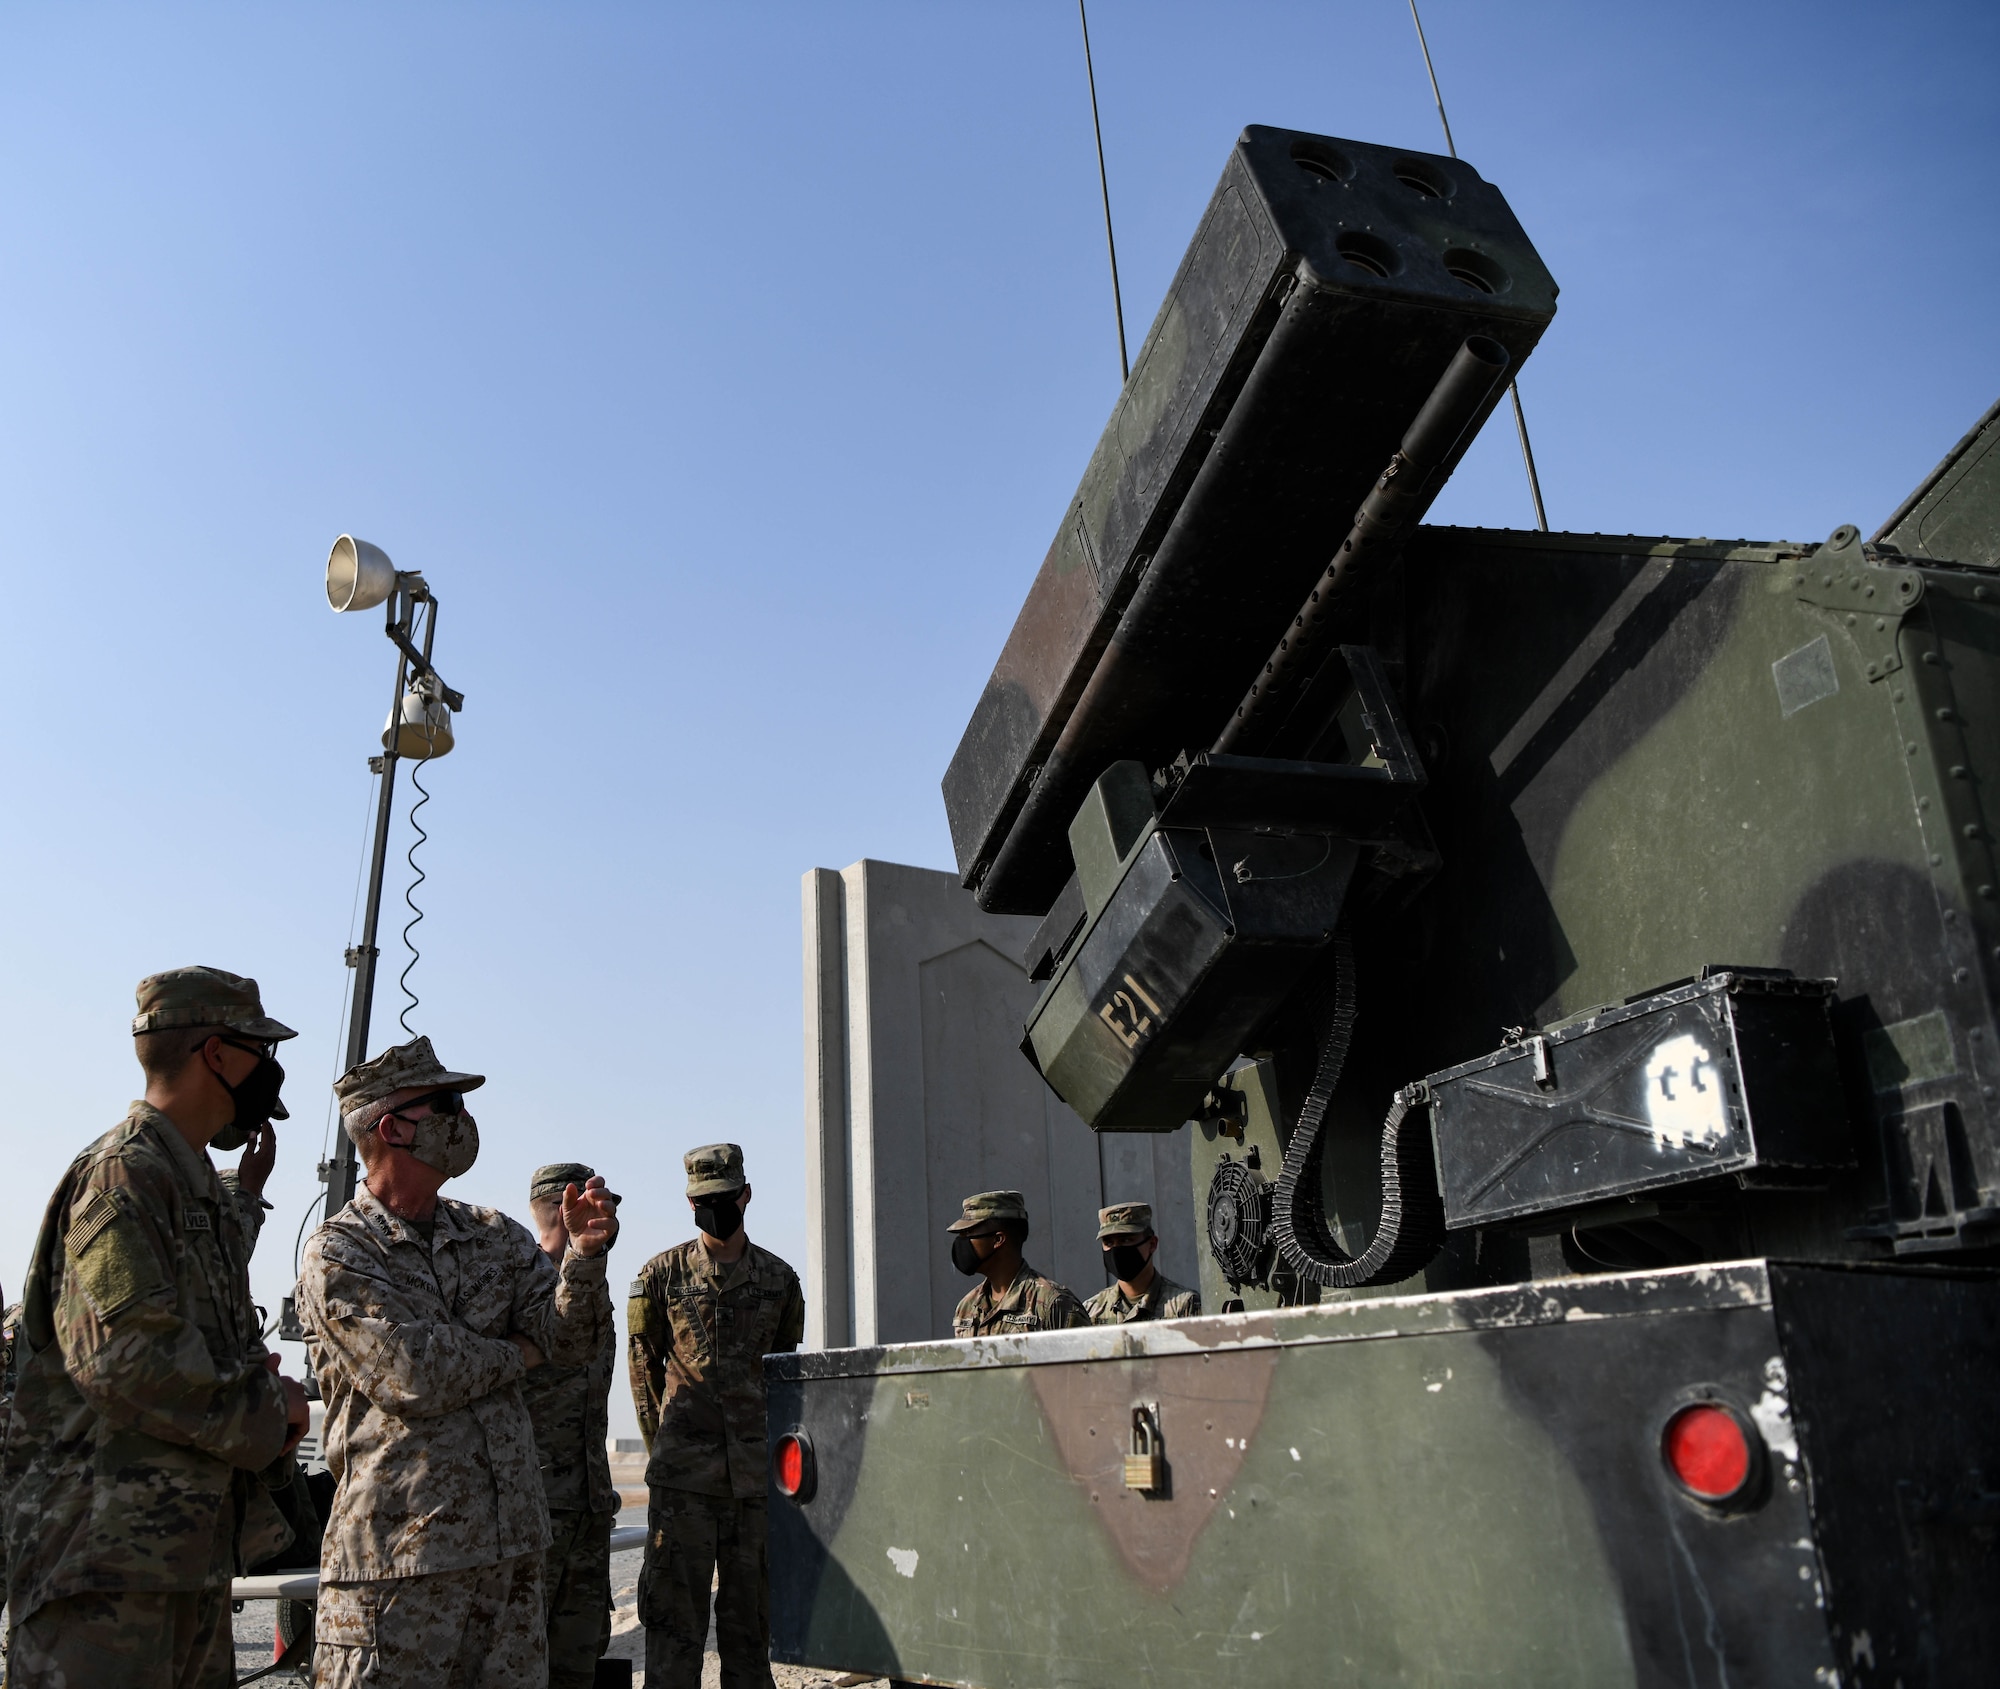 U.S. Marine Corps Gen. Kenneth F. McKenzie Jr., United States Central Command commander, receives a briefing about the capabilities the Avenger Air Defense System during a visit to the Alpha Battery 5-52 Air Defense Artillery Battalion, Sept. 13, 2020, at Al Dhafra Air Base, United Arab Emirates.